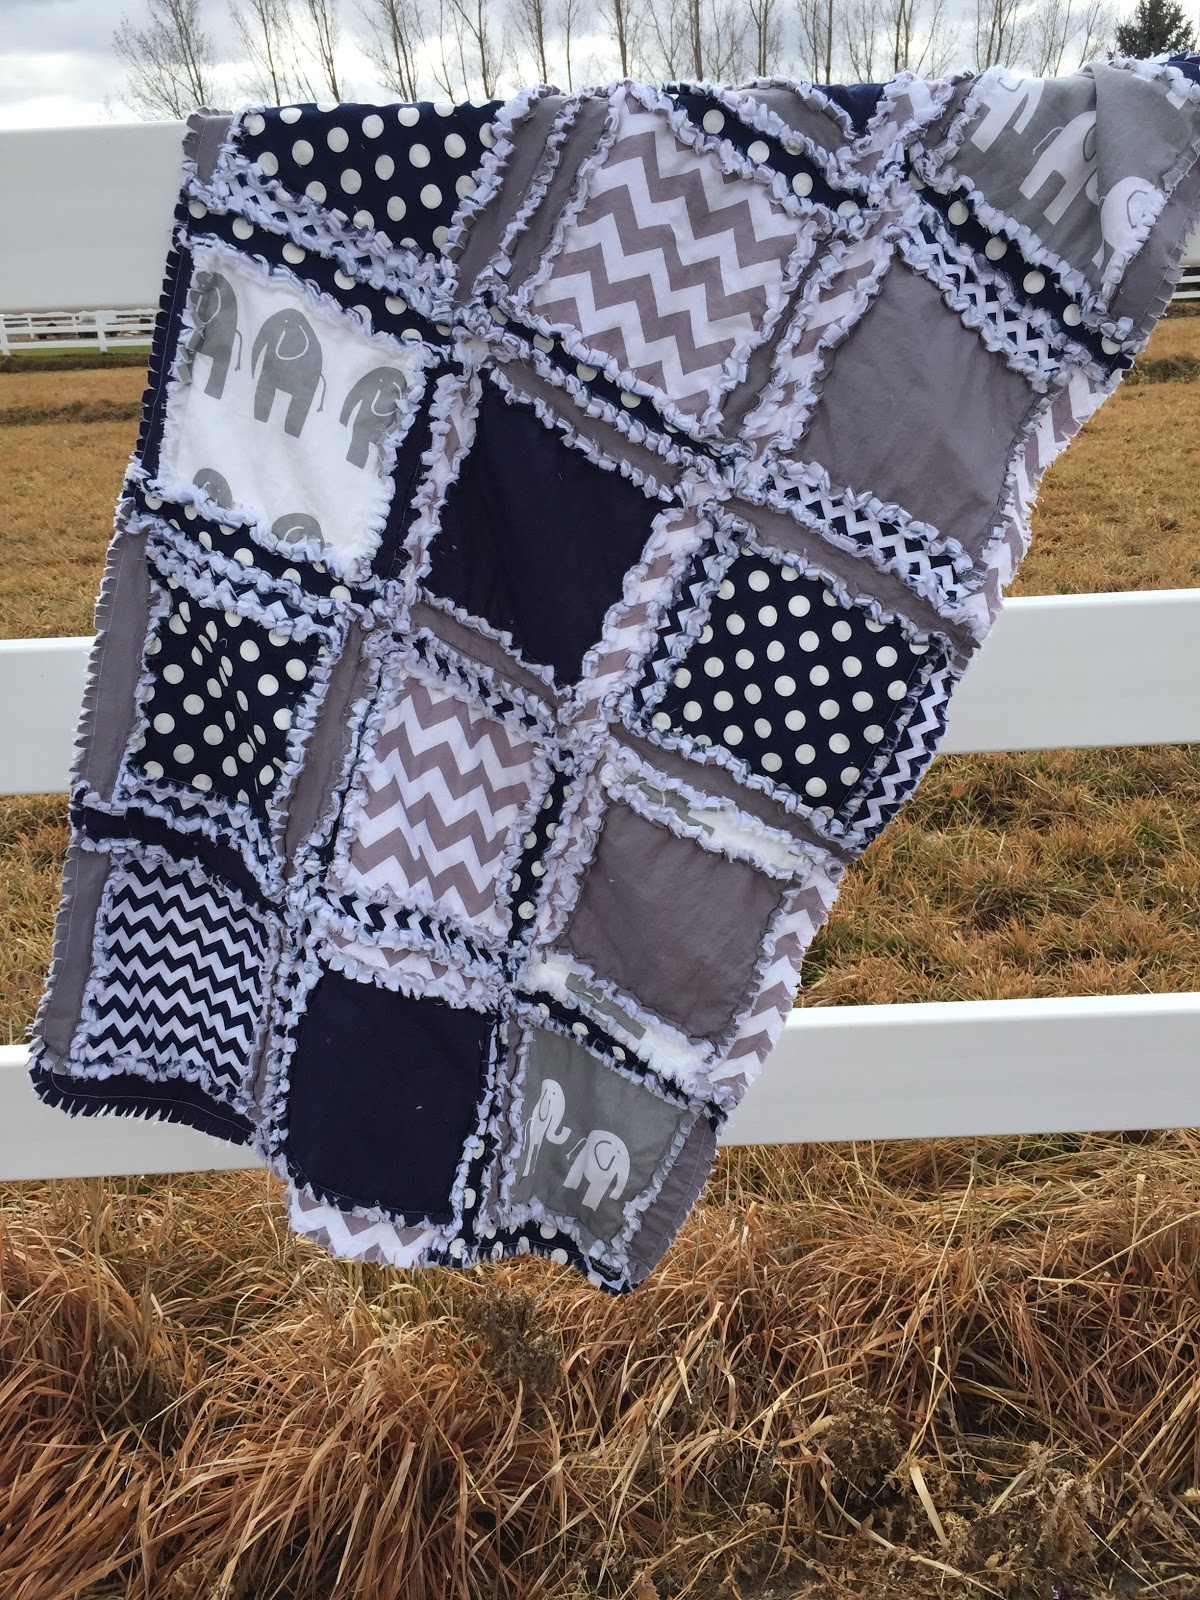 navy blue and gray elephant rag quilt for baby boy crib or toddler bed